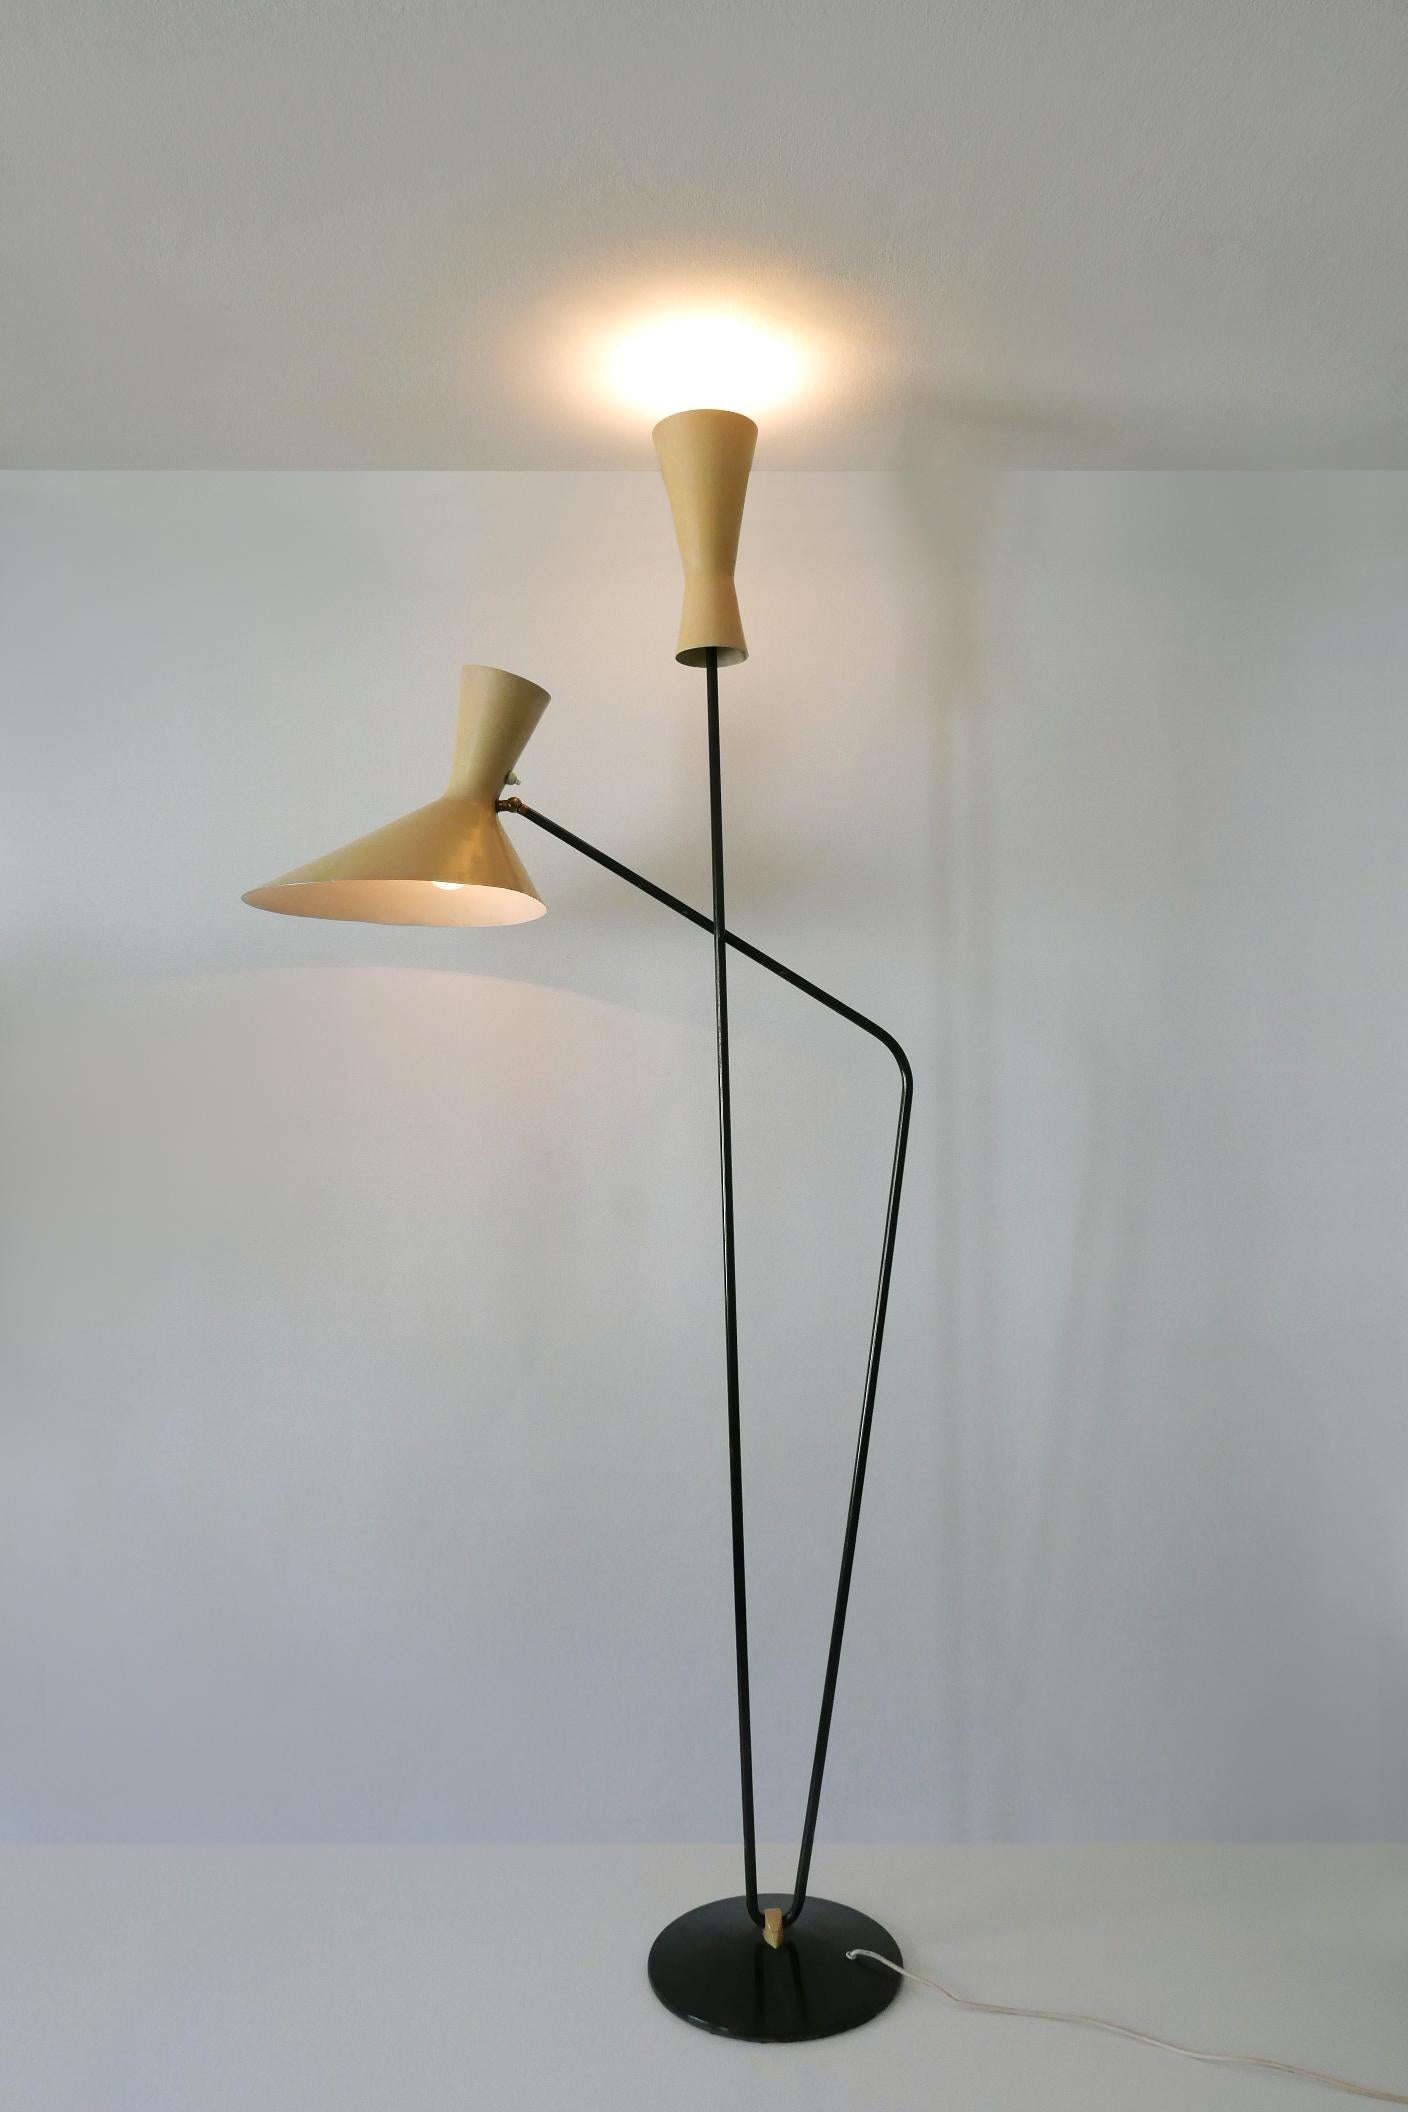 Rare Iconic Mid-Century Modern Floor Lamp by Prof. Carl Moor for BAG Turgi 1950s For Sale 2